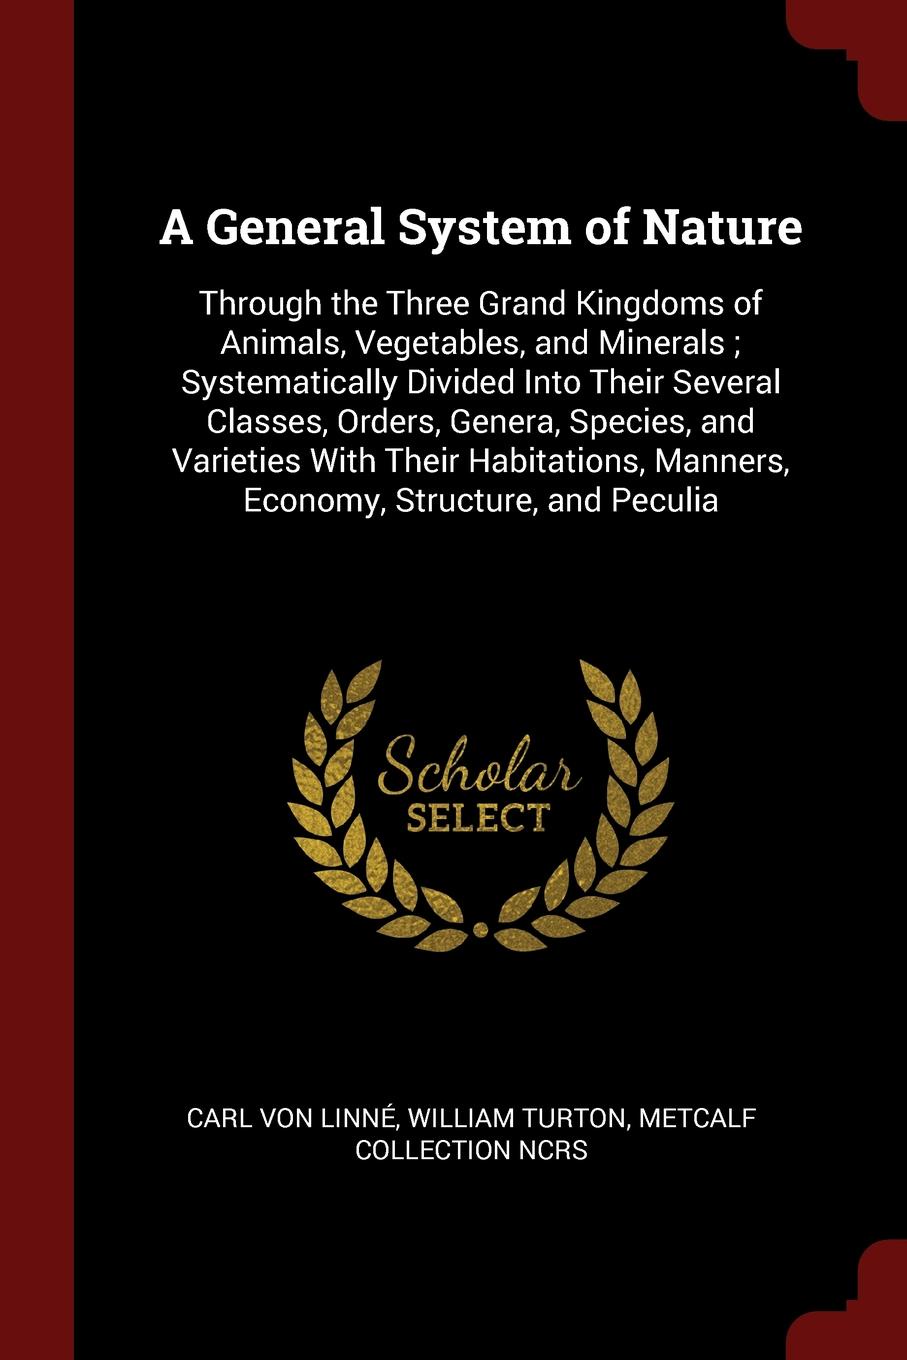 A General System of Nature. Through the Three Grand Kingdoms of Animals, Vegetables, and Minerals ; Systematically Divided Into Their Several Classes, Orders, Genera, Species, and Varieties With Their Habitations, Manners, Economy, Structure, and ...